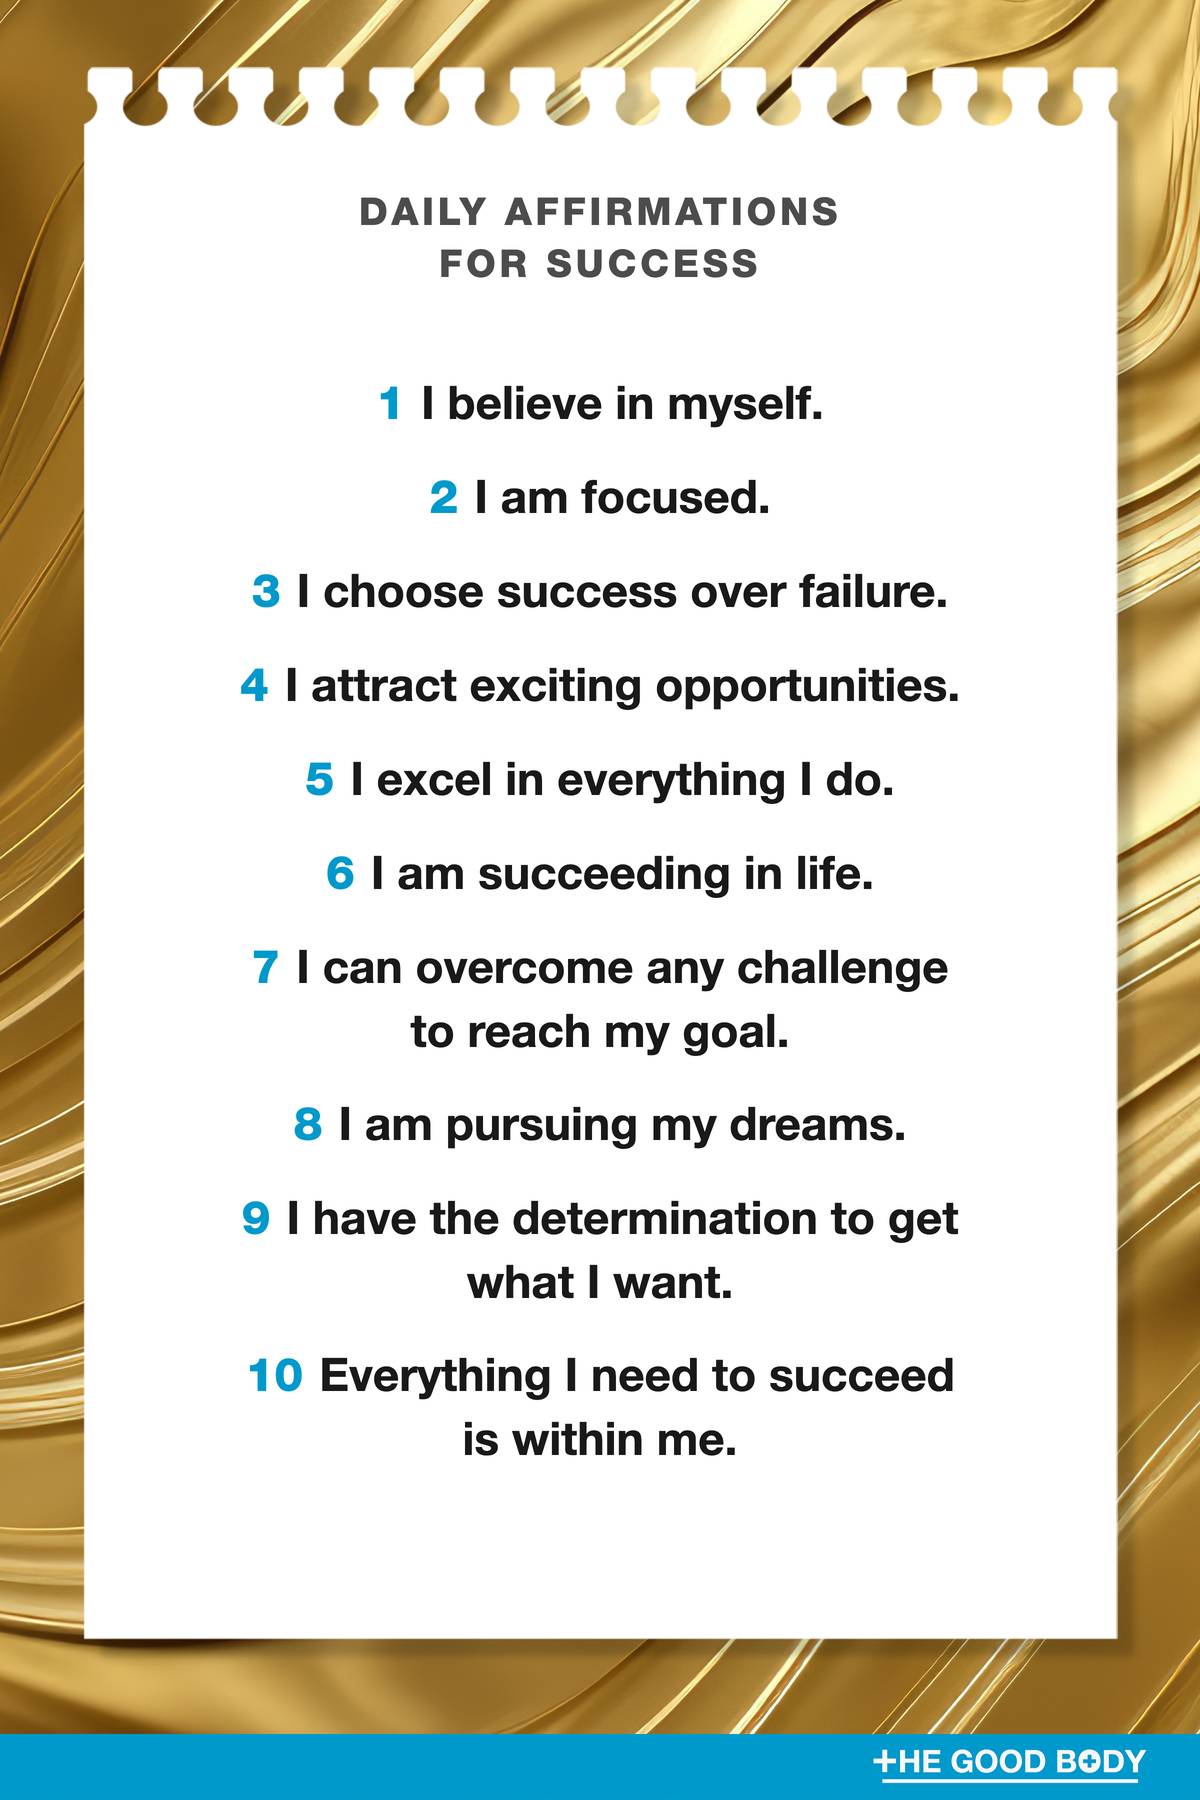 10 Daily Affirmations for Success on Note Paper with Gold Texture Background